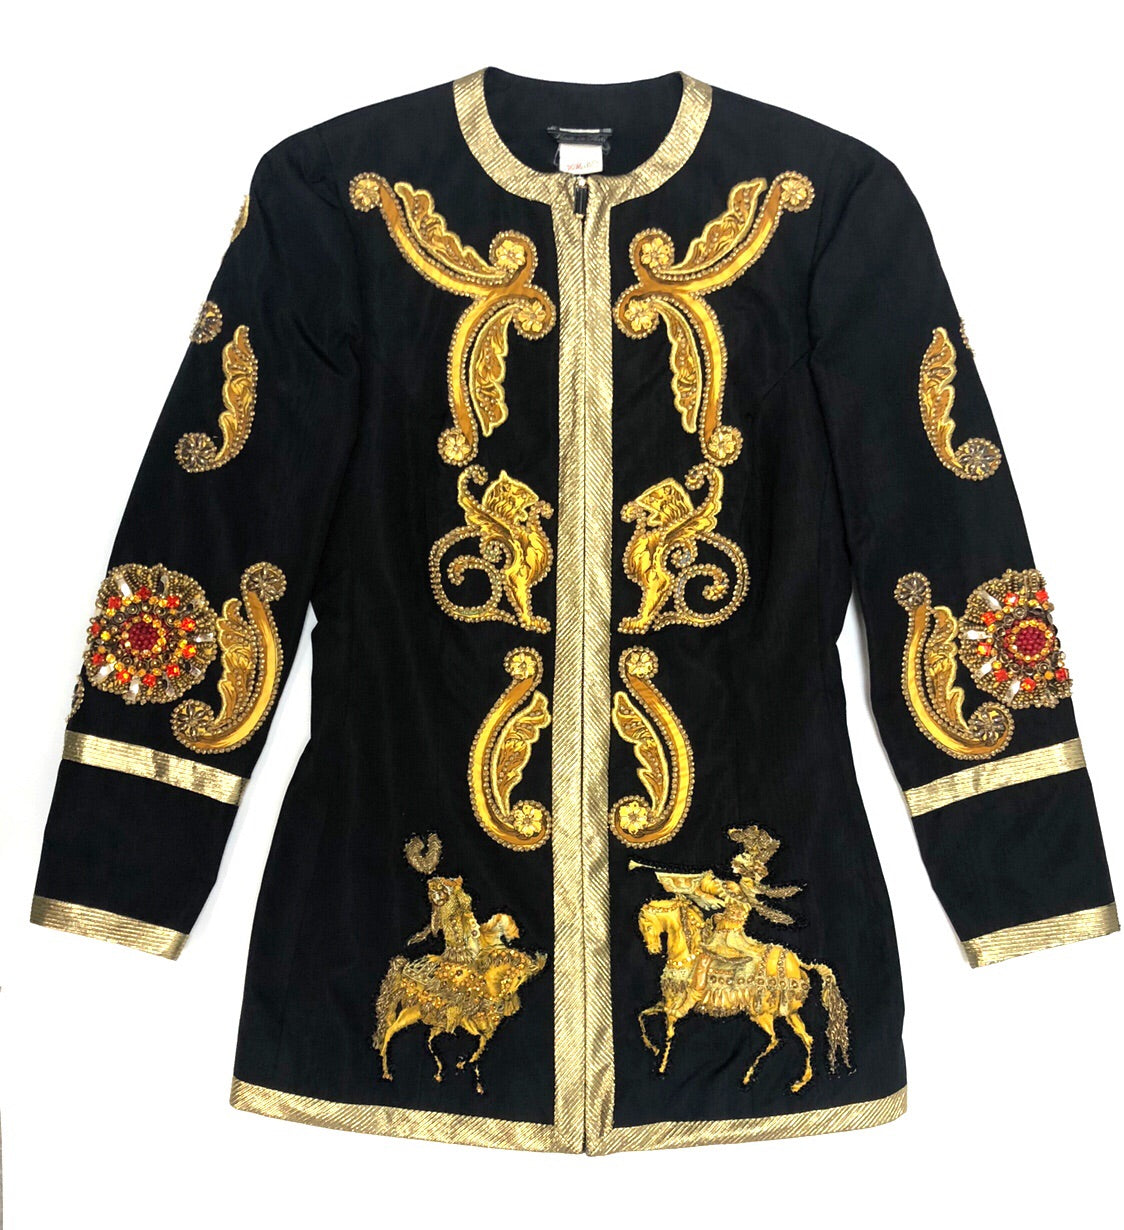 Gianni Versace Embroidered Jacket